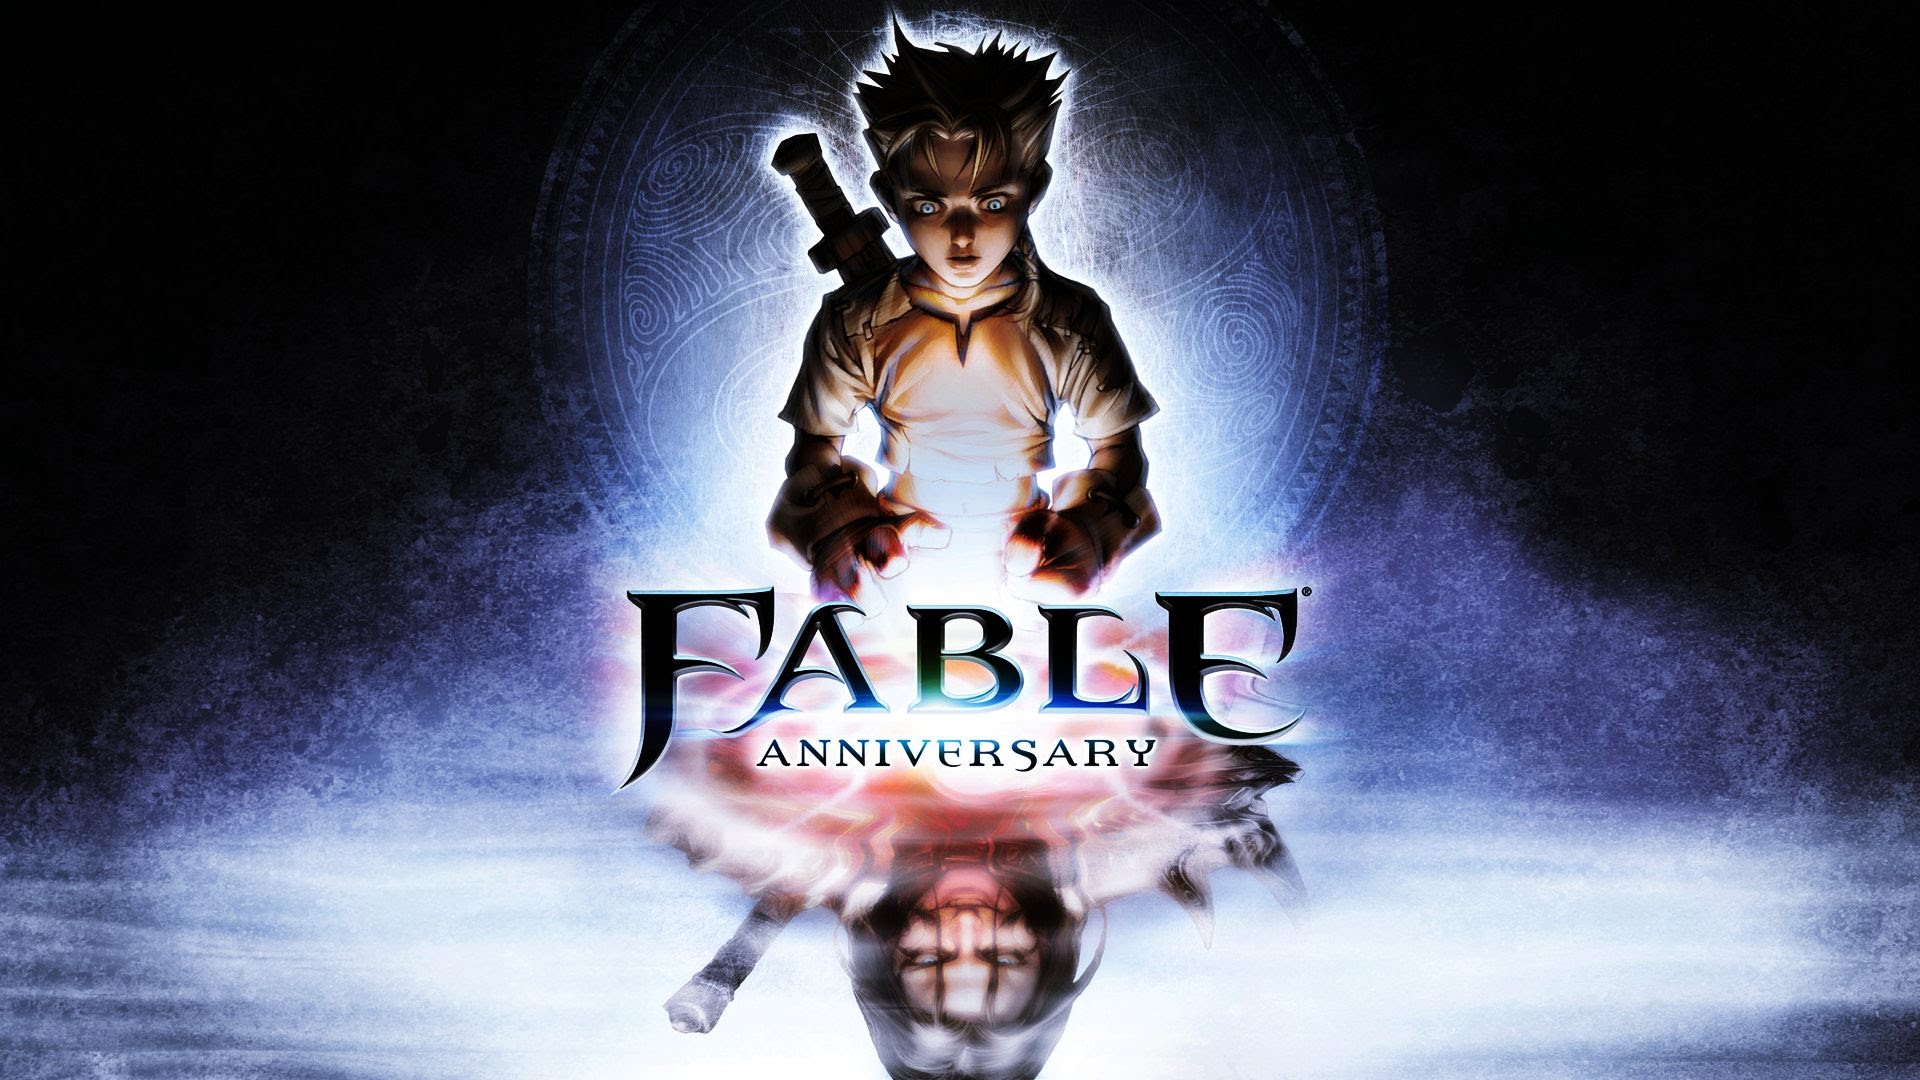 Fable Hd Wallpaper Hd - Fable Anniversary , HD Wallpaper & Backgrounds